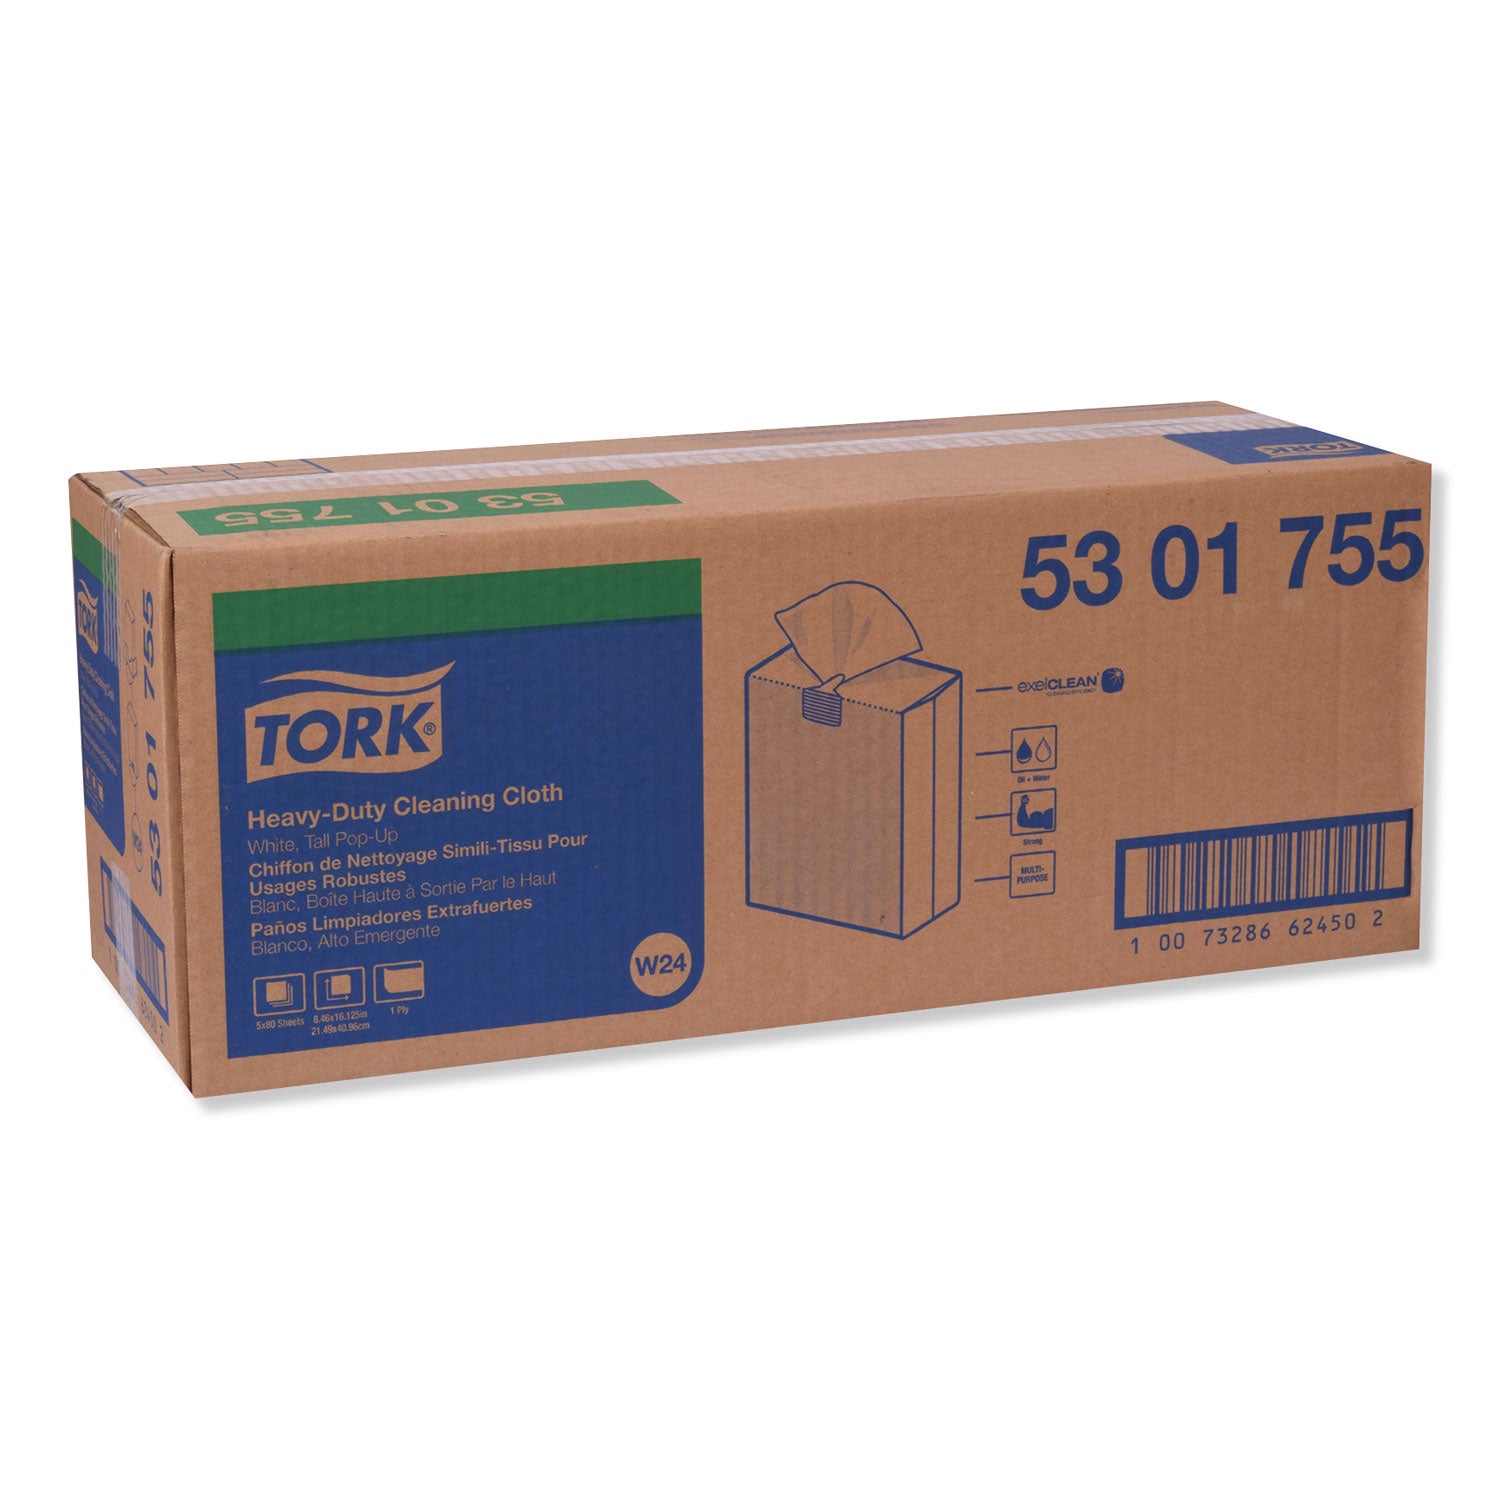 heavy-duty-cleaning-cloth-846-x-1613-white-80-box-5-boxes-carton_trk5301755 - 2